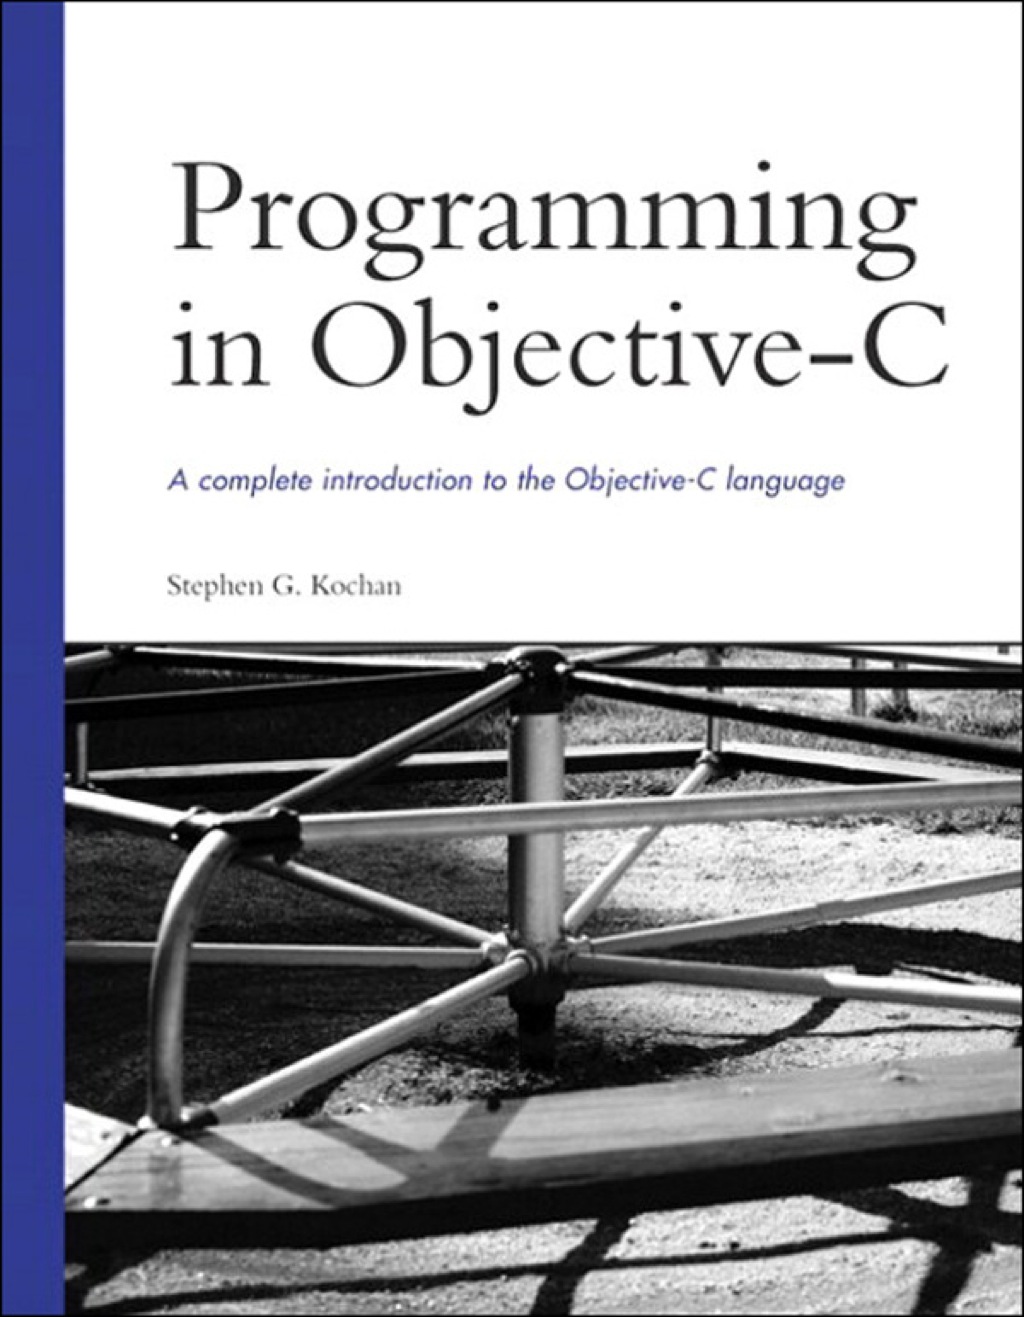 Programming in Objective-C (English Edition)